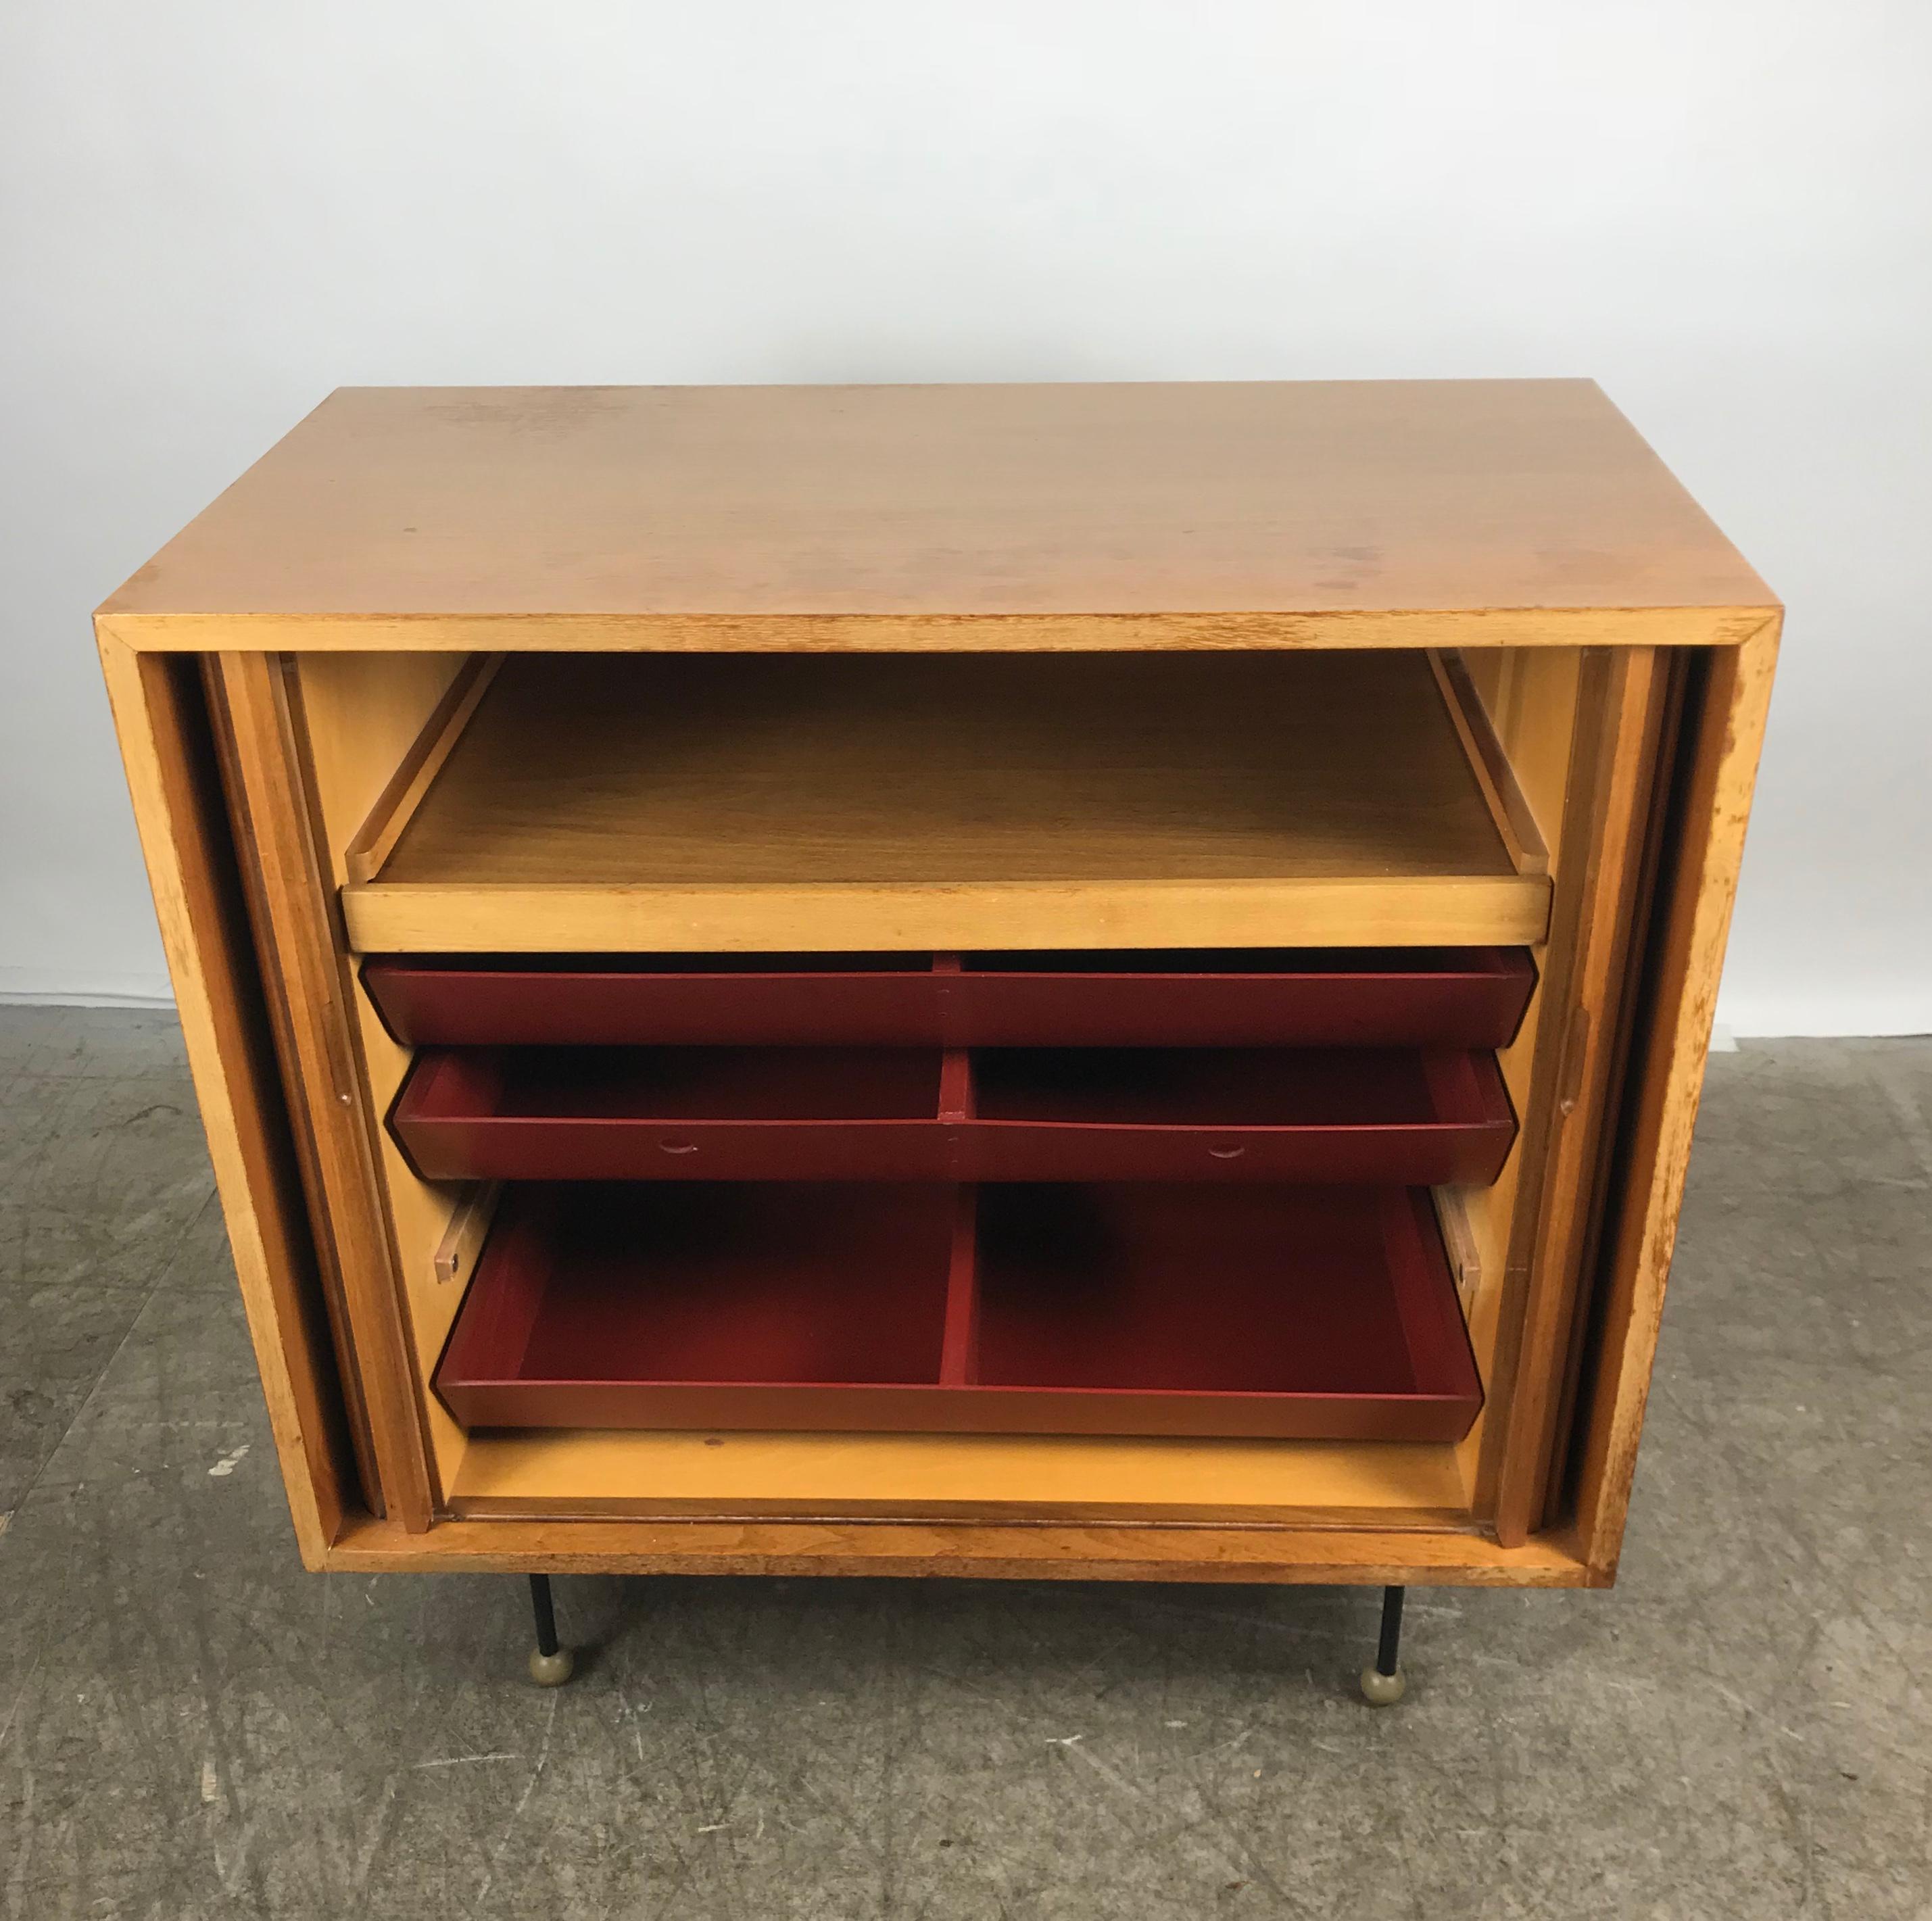 Rare Mid-Century Modern Tambor door cabinet by Greta Grossman, nice original condition. Features two tambor doors over pullout / pull-out shelf and three wood and fiberglass divided drawers, and of course signature iron stick legs with wonderfully